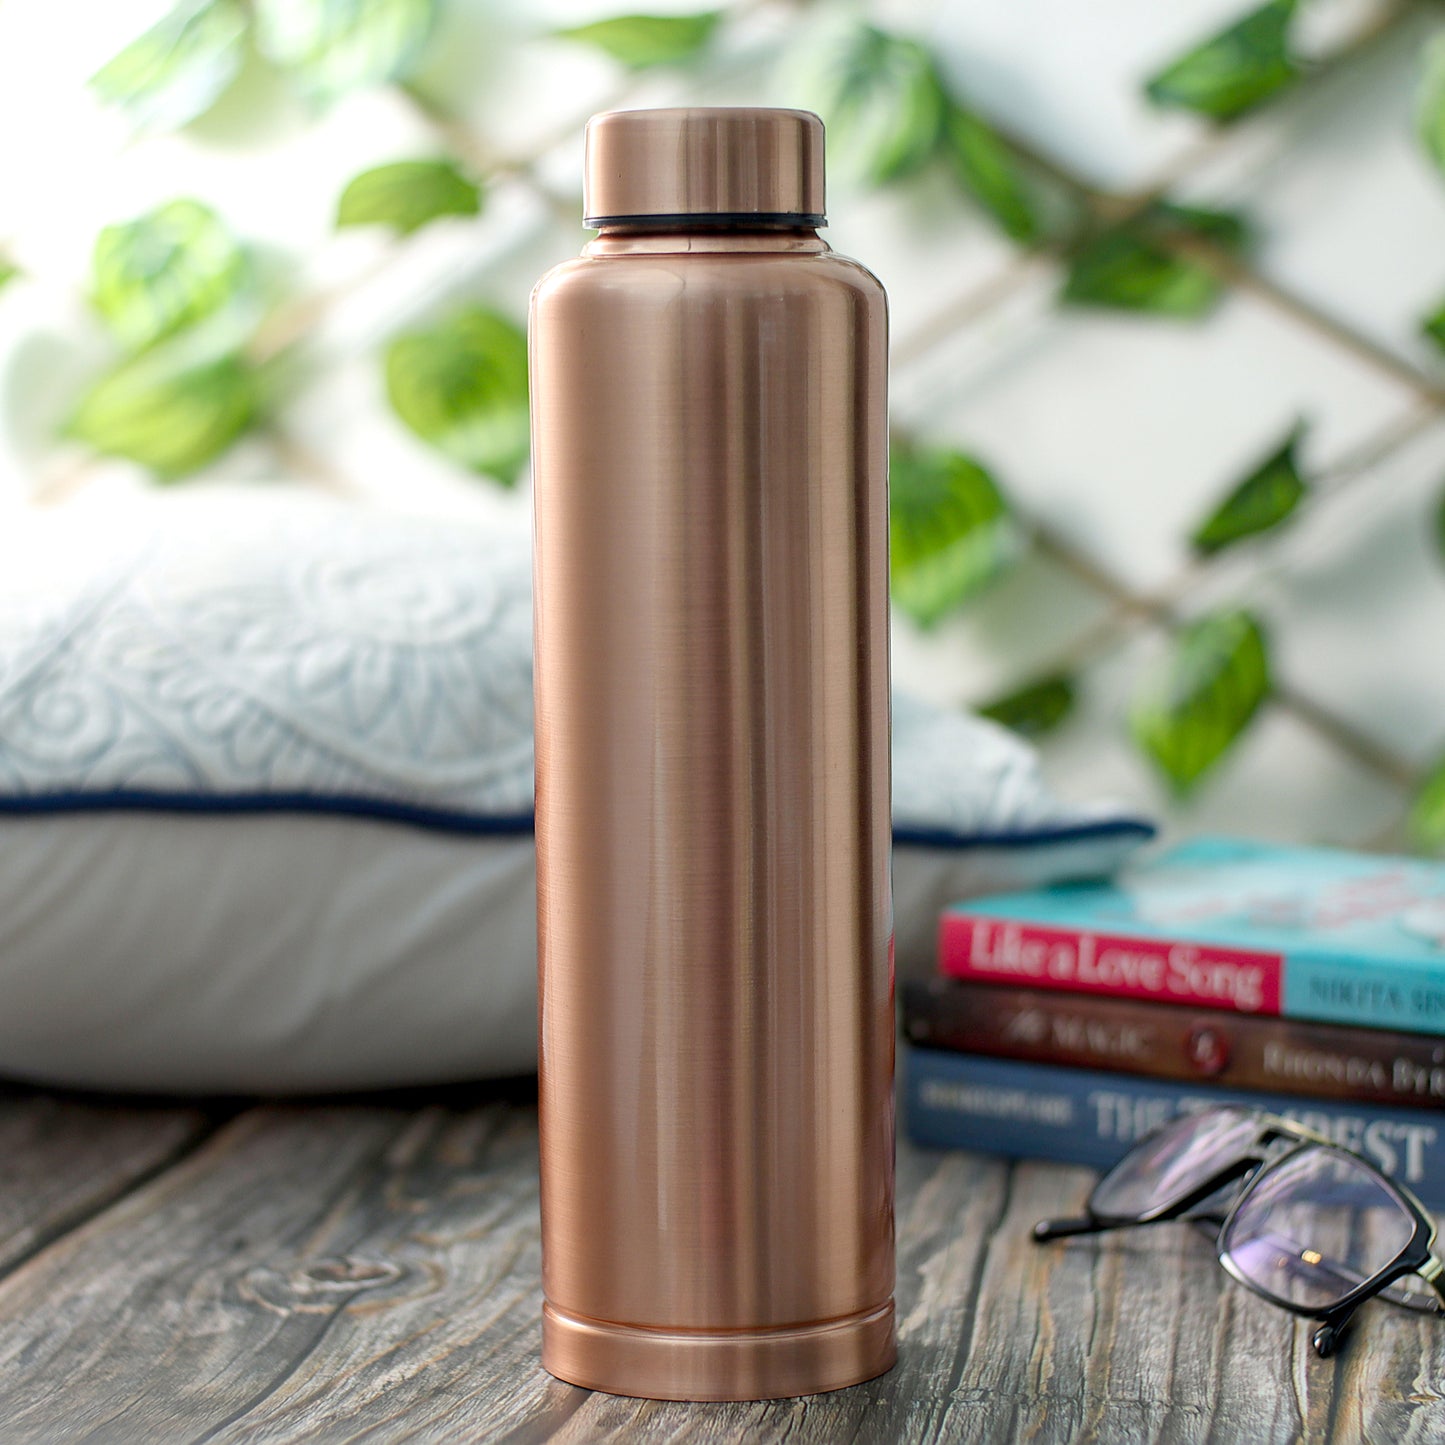 Basket Bum Heritage: Embrace Wellness in Style with our Pure Copper Heavy Quality Bottle